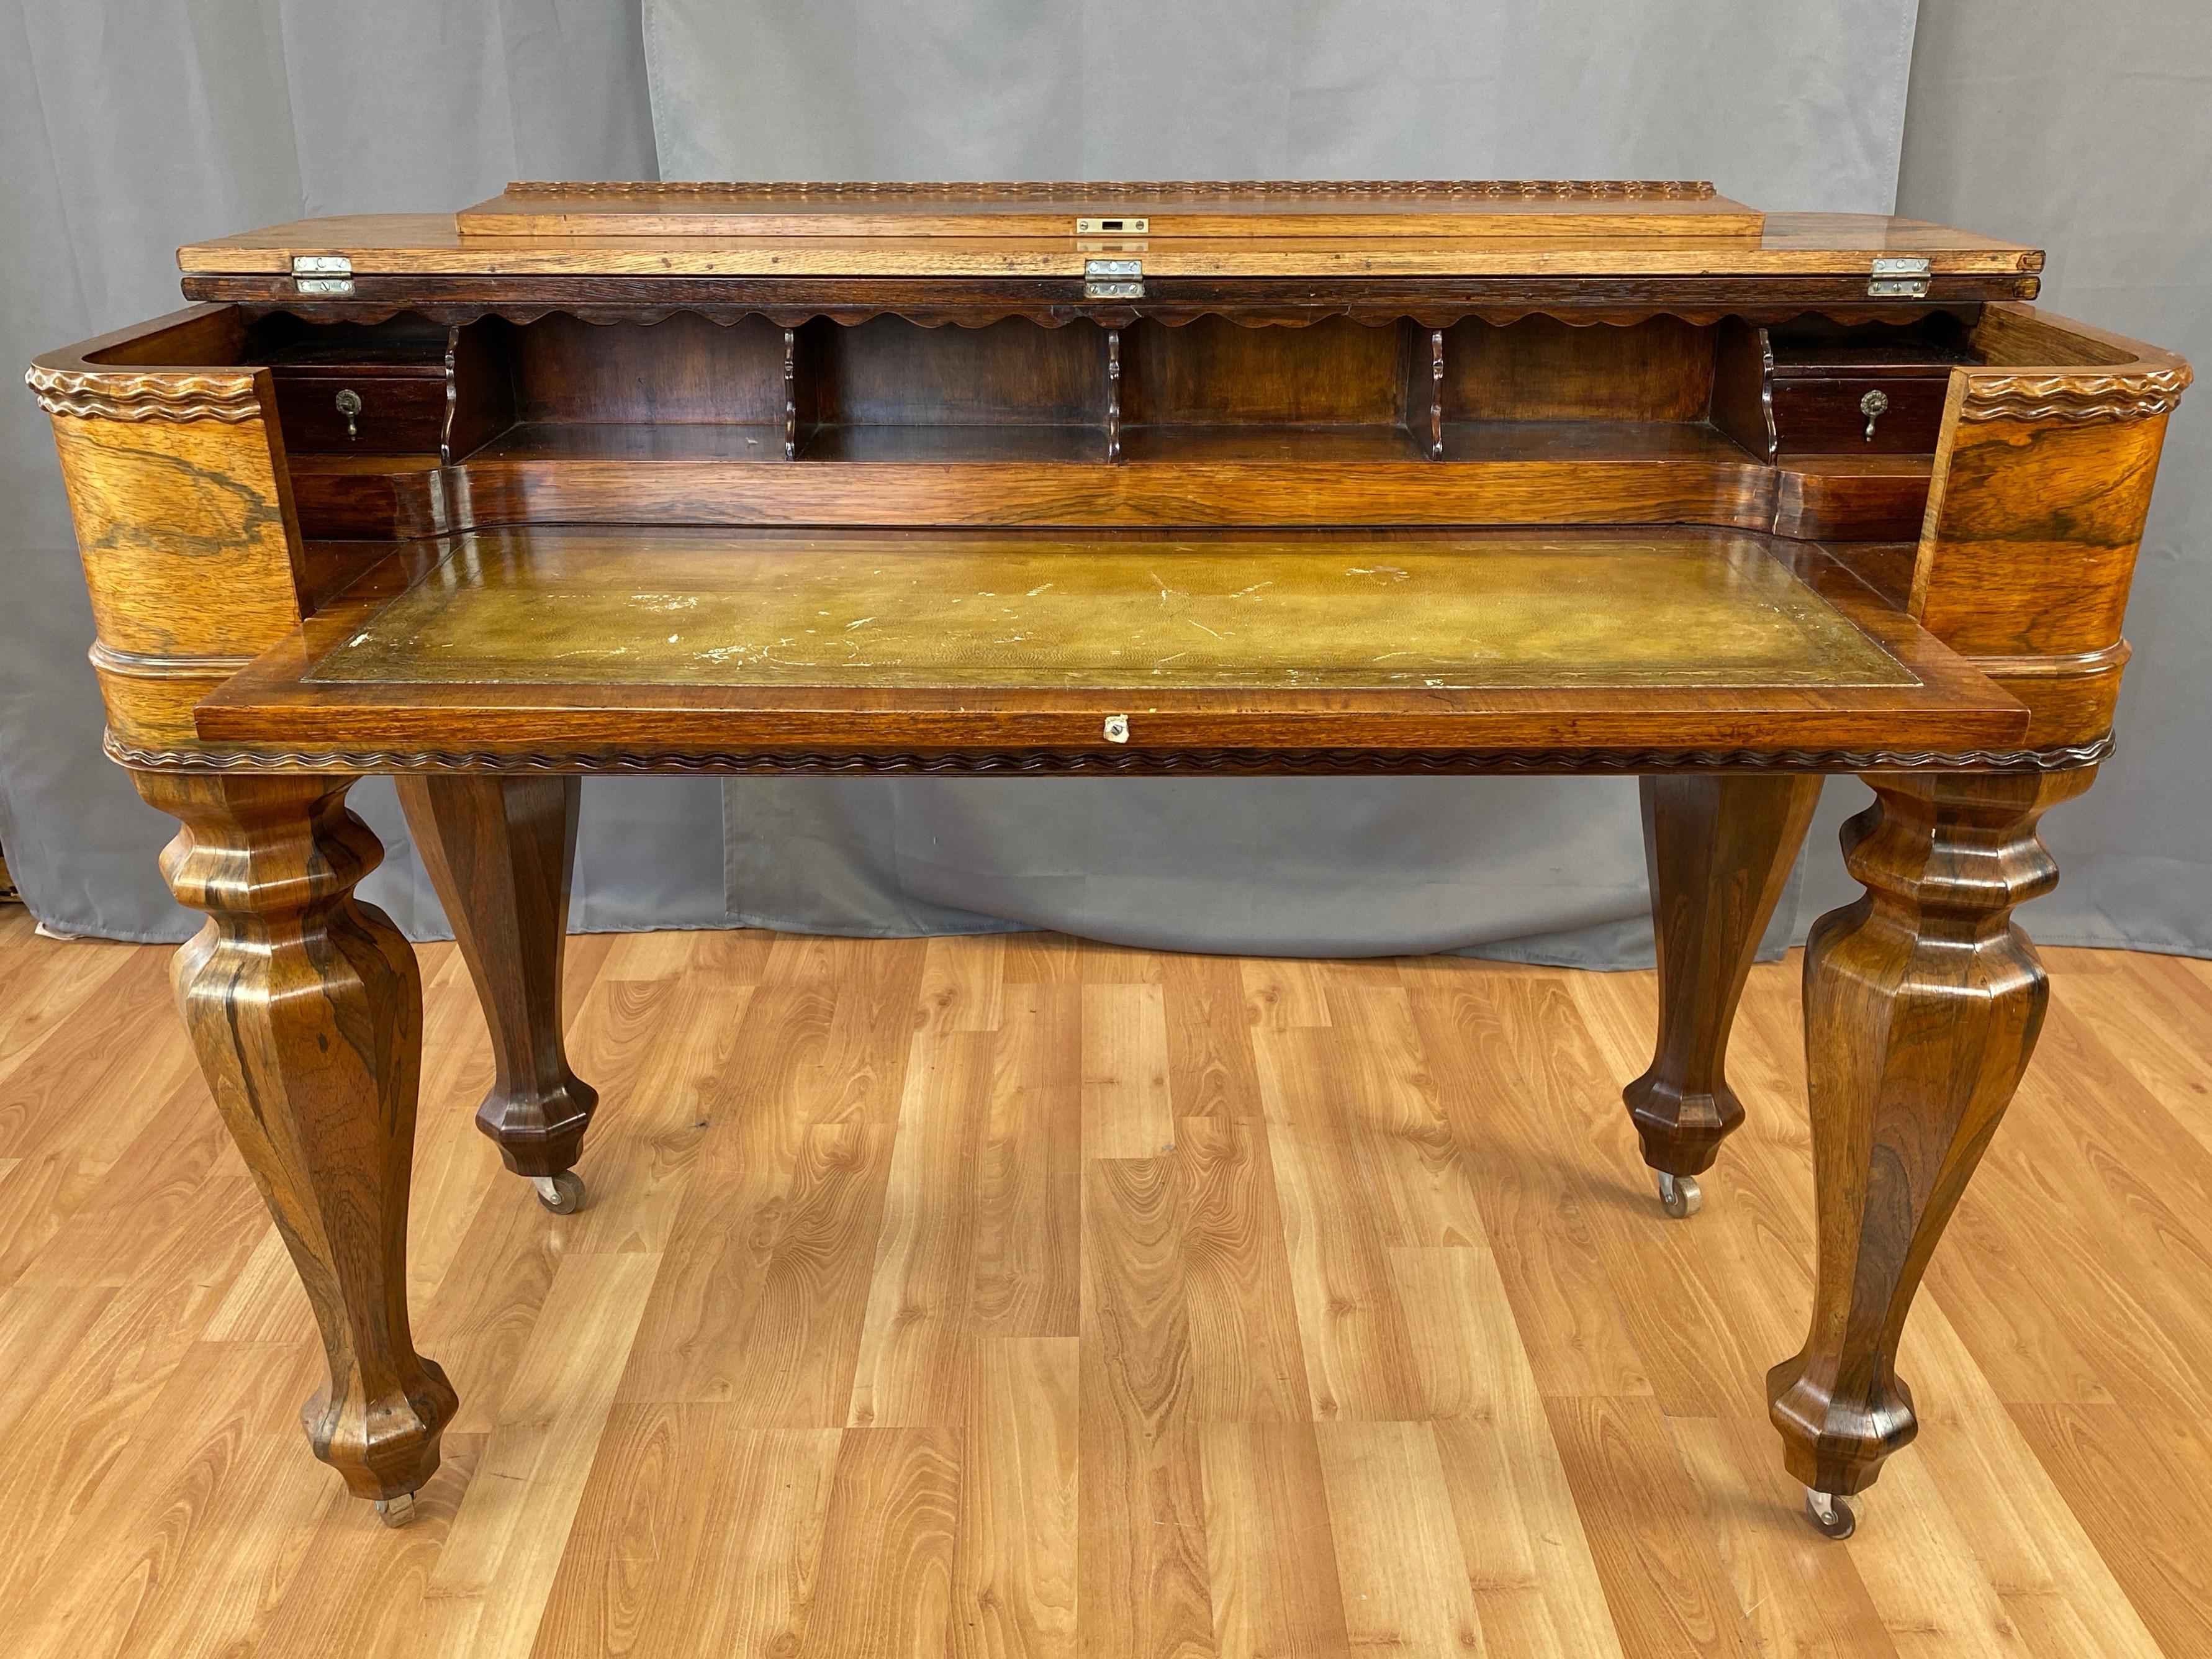 A stately and impressive early Victorian era rosewood converted melodeon flip-top desk with pull-out writing surface. Dating from the 1850s, this former musical instrument’s exceptionally well executed transition likely took place in the late 1800s